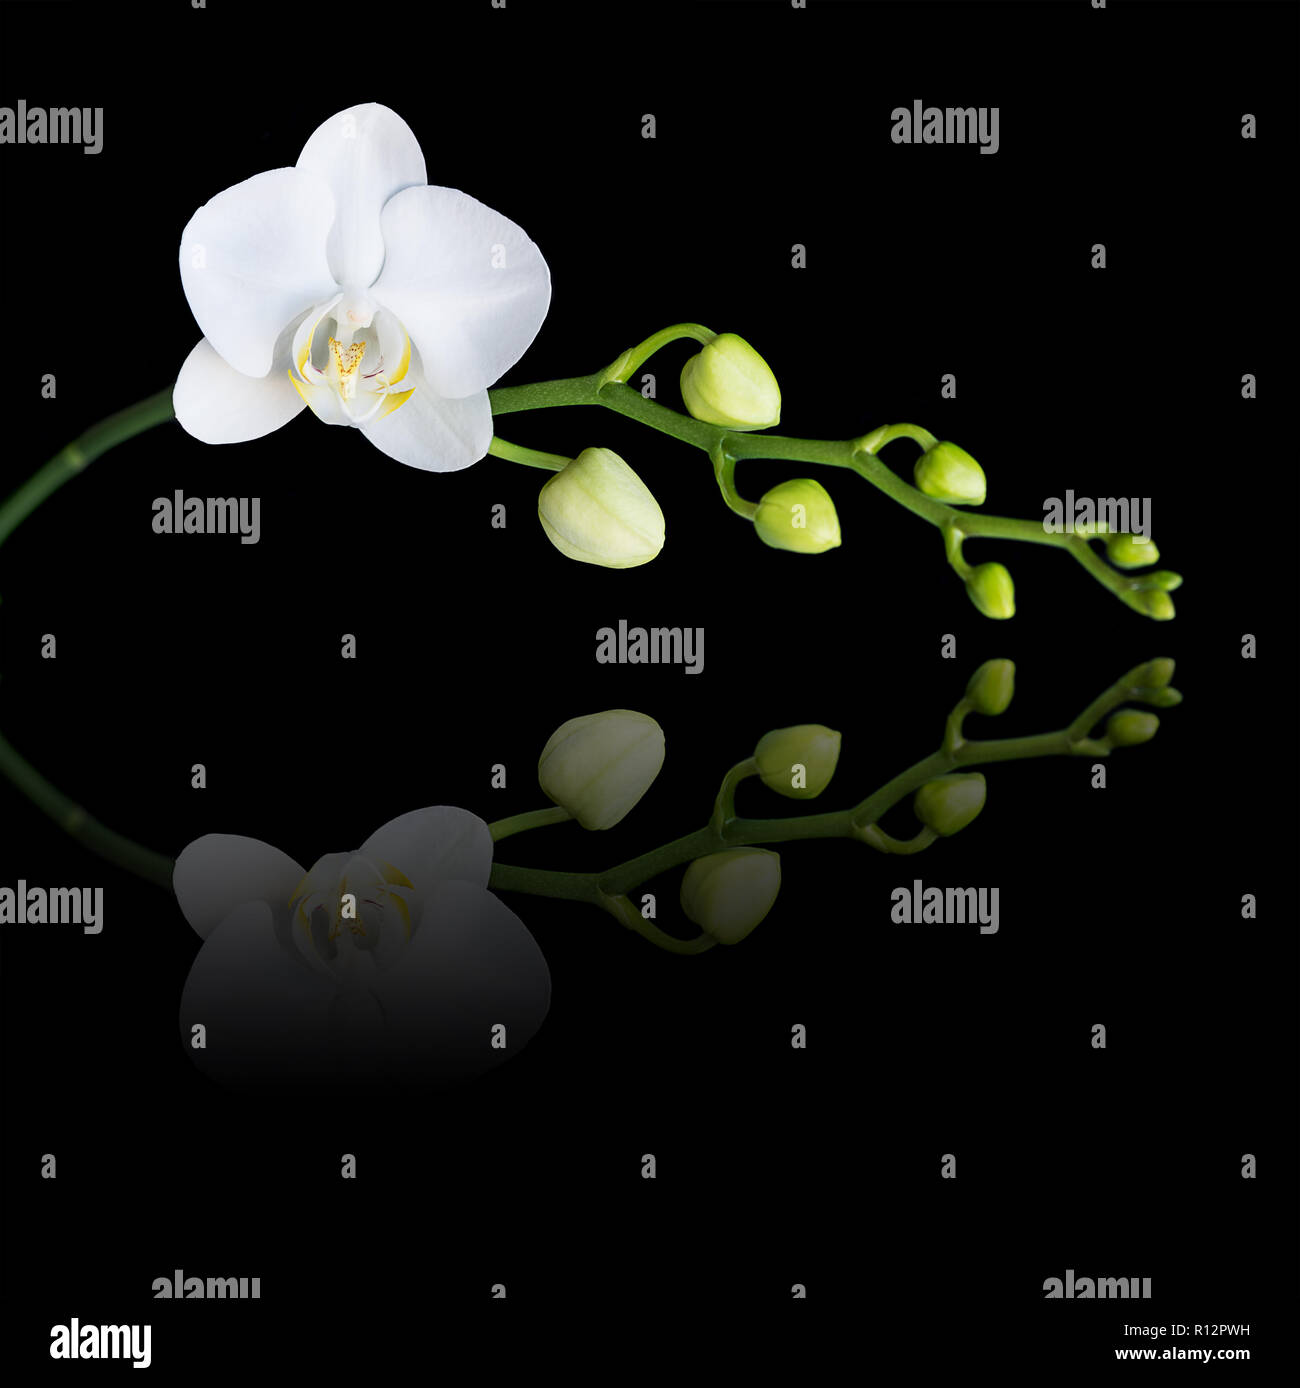 White flower of a phalaenopsis orchid with several buds on a branch, isolated on a black background, reflected in the mirror surface Stock Photo